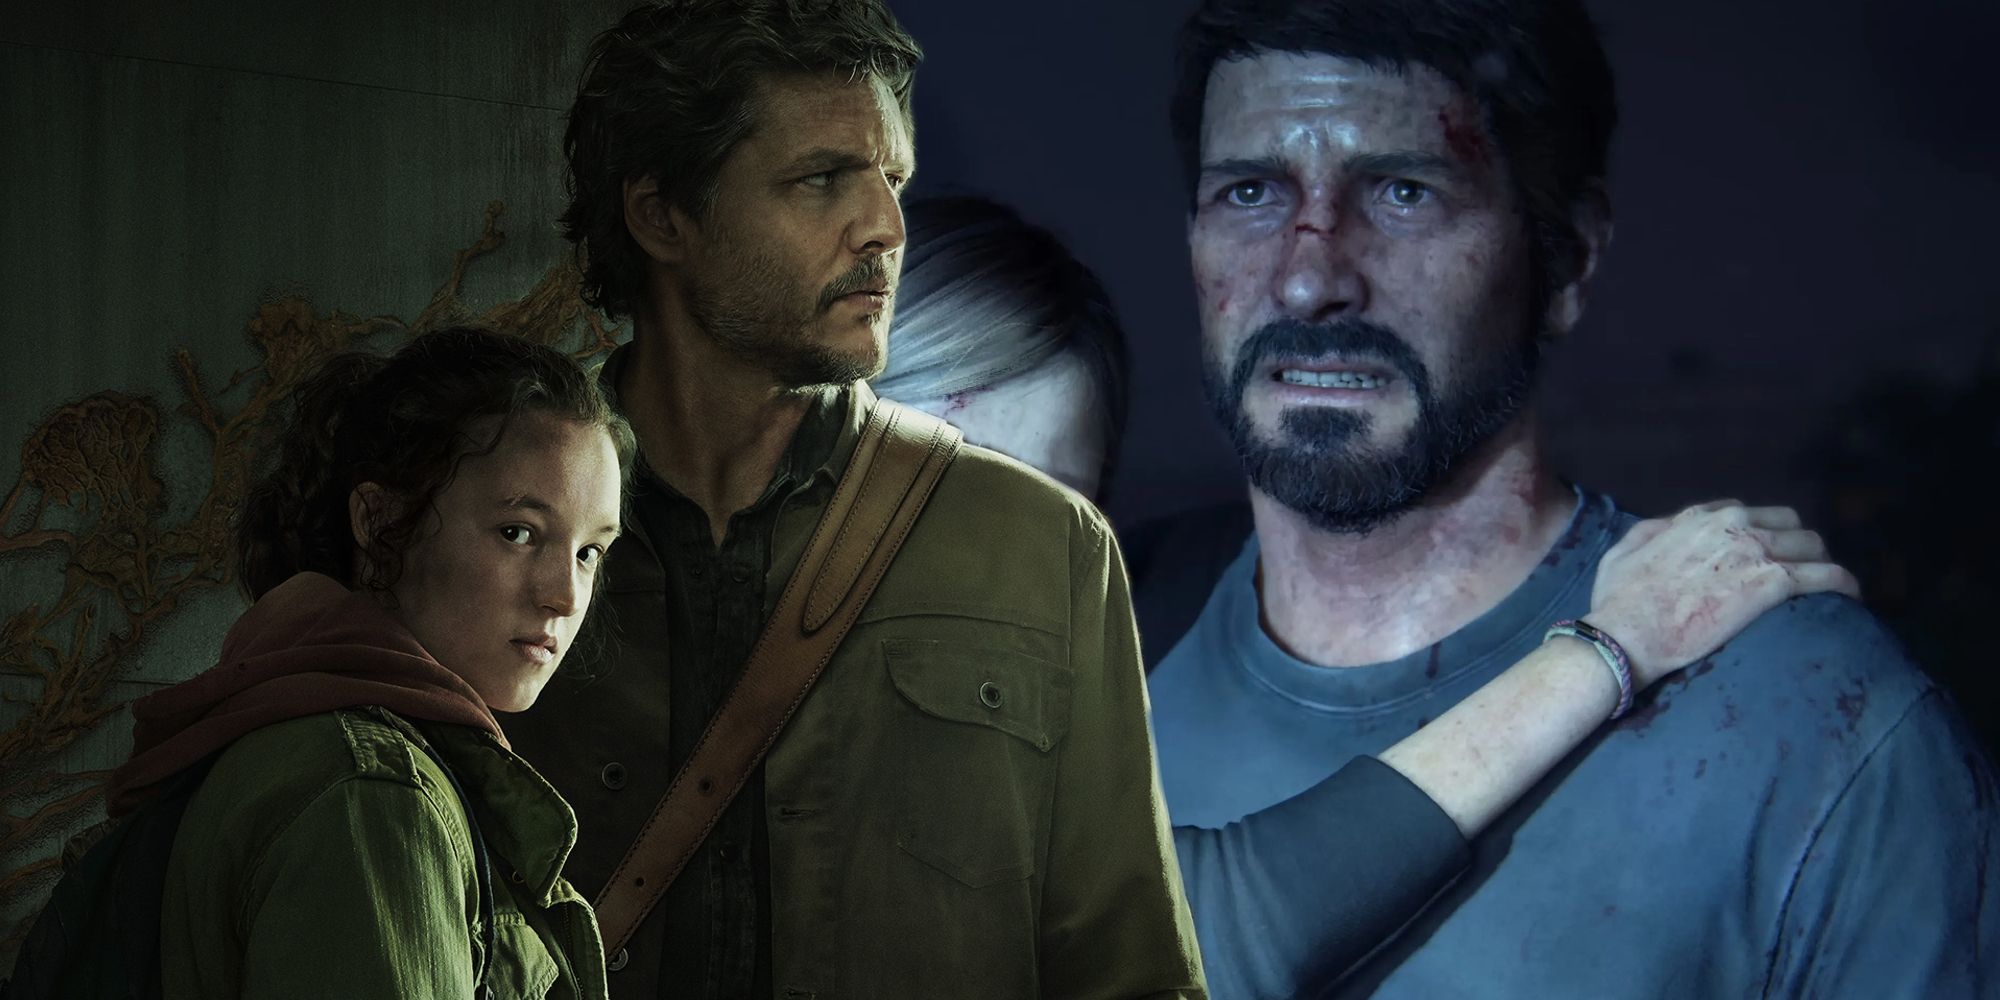 How Long can you play as Joel in The Last of Us 2 vs. The Last of